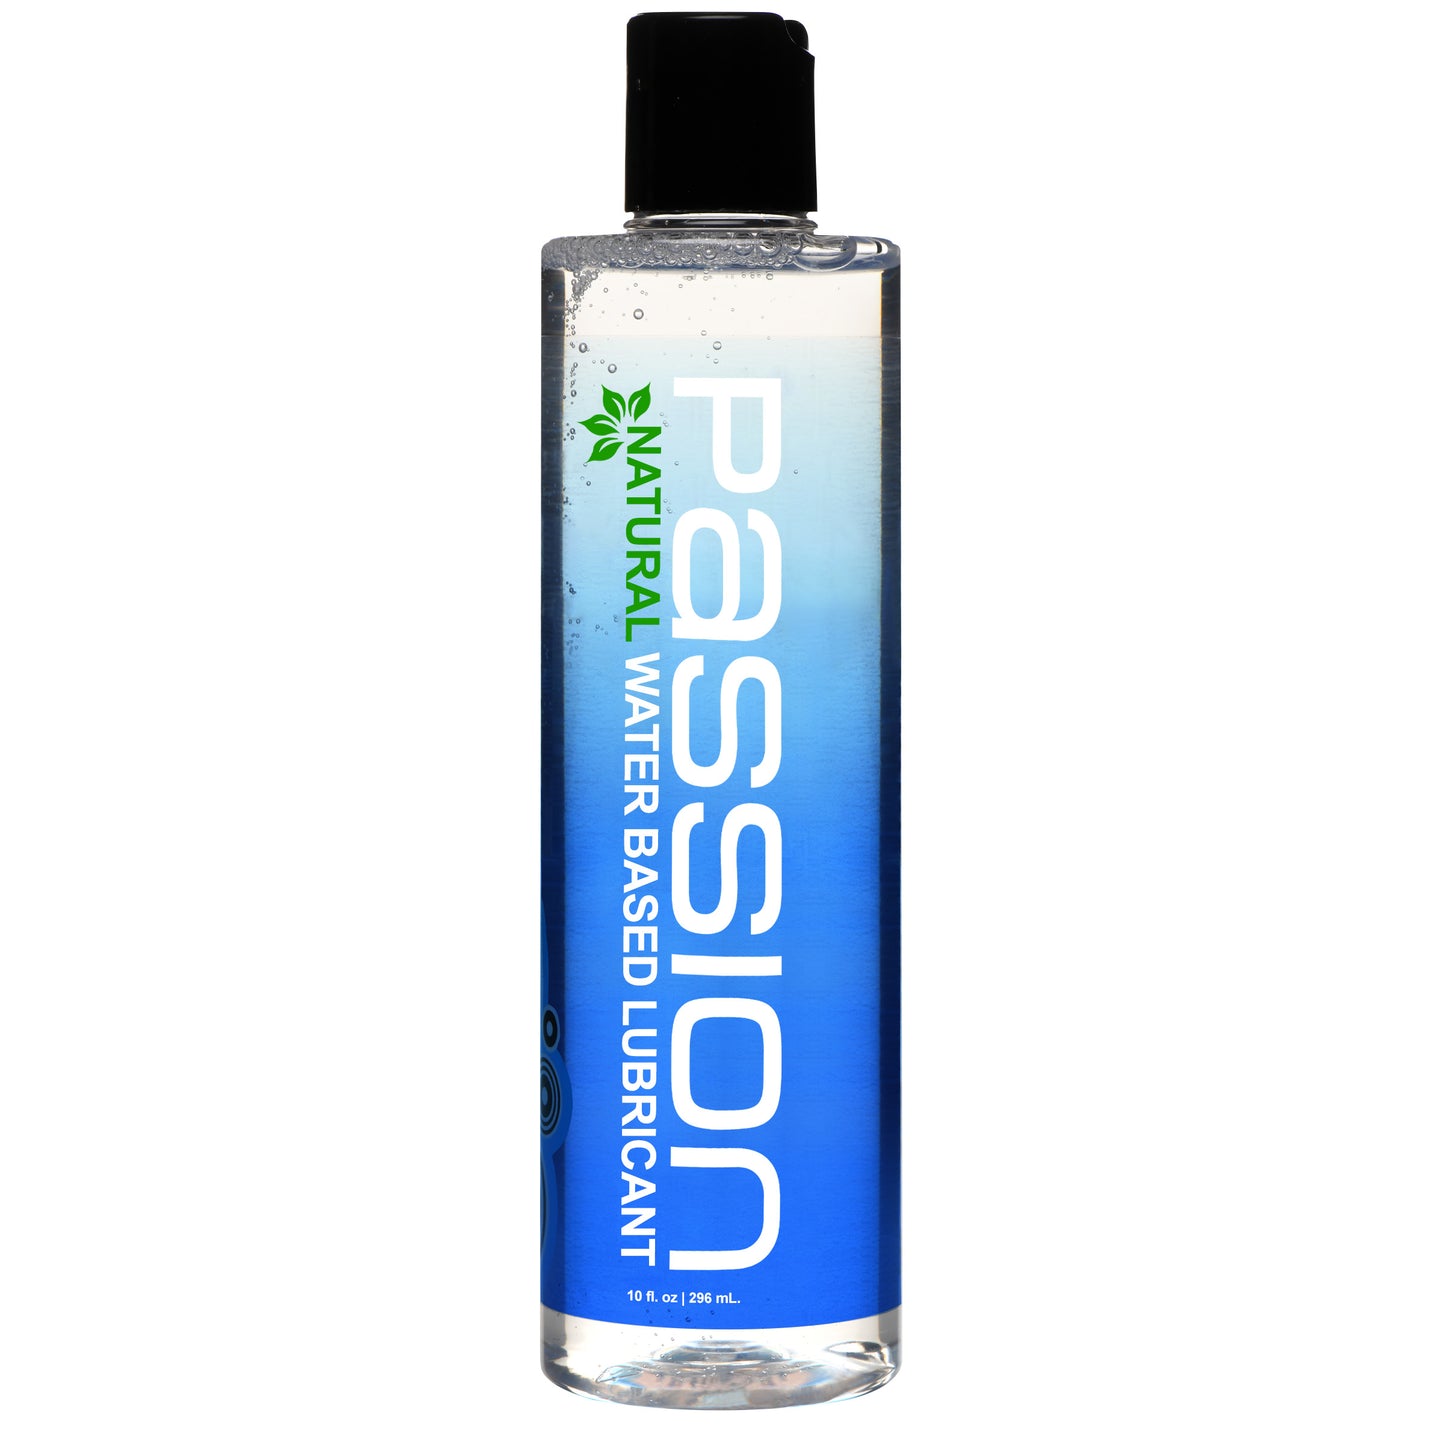 Passion Natural Water-based Lubricant - 10 Oz